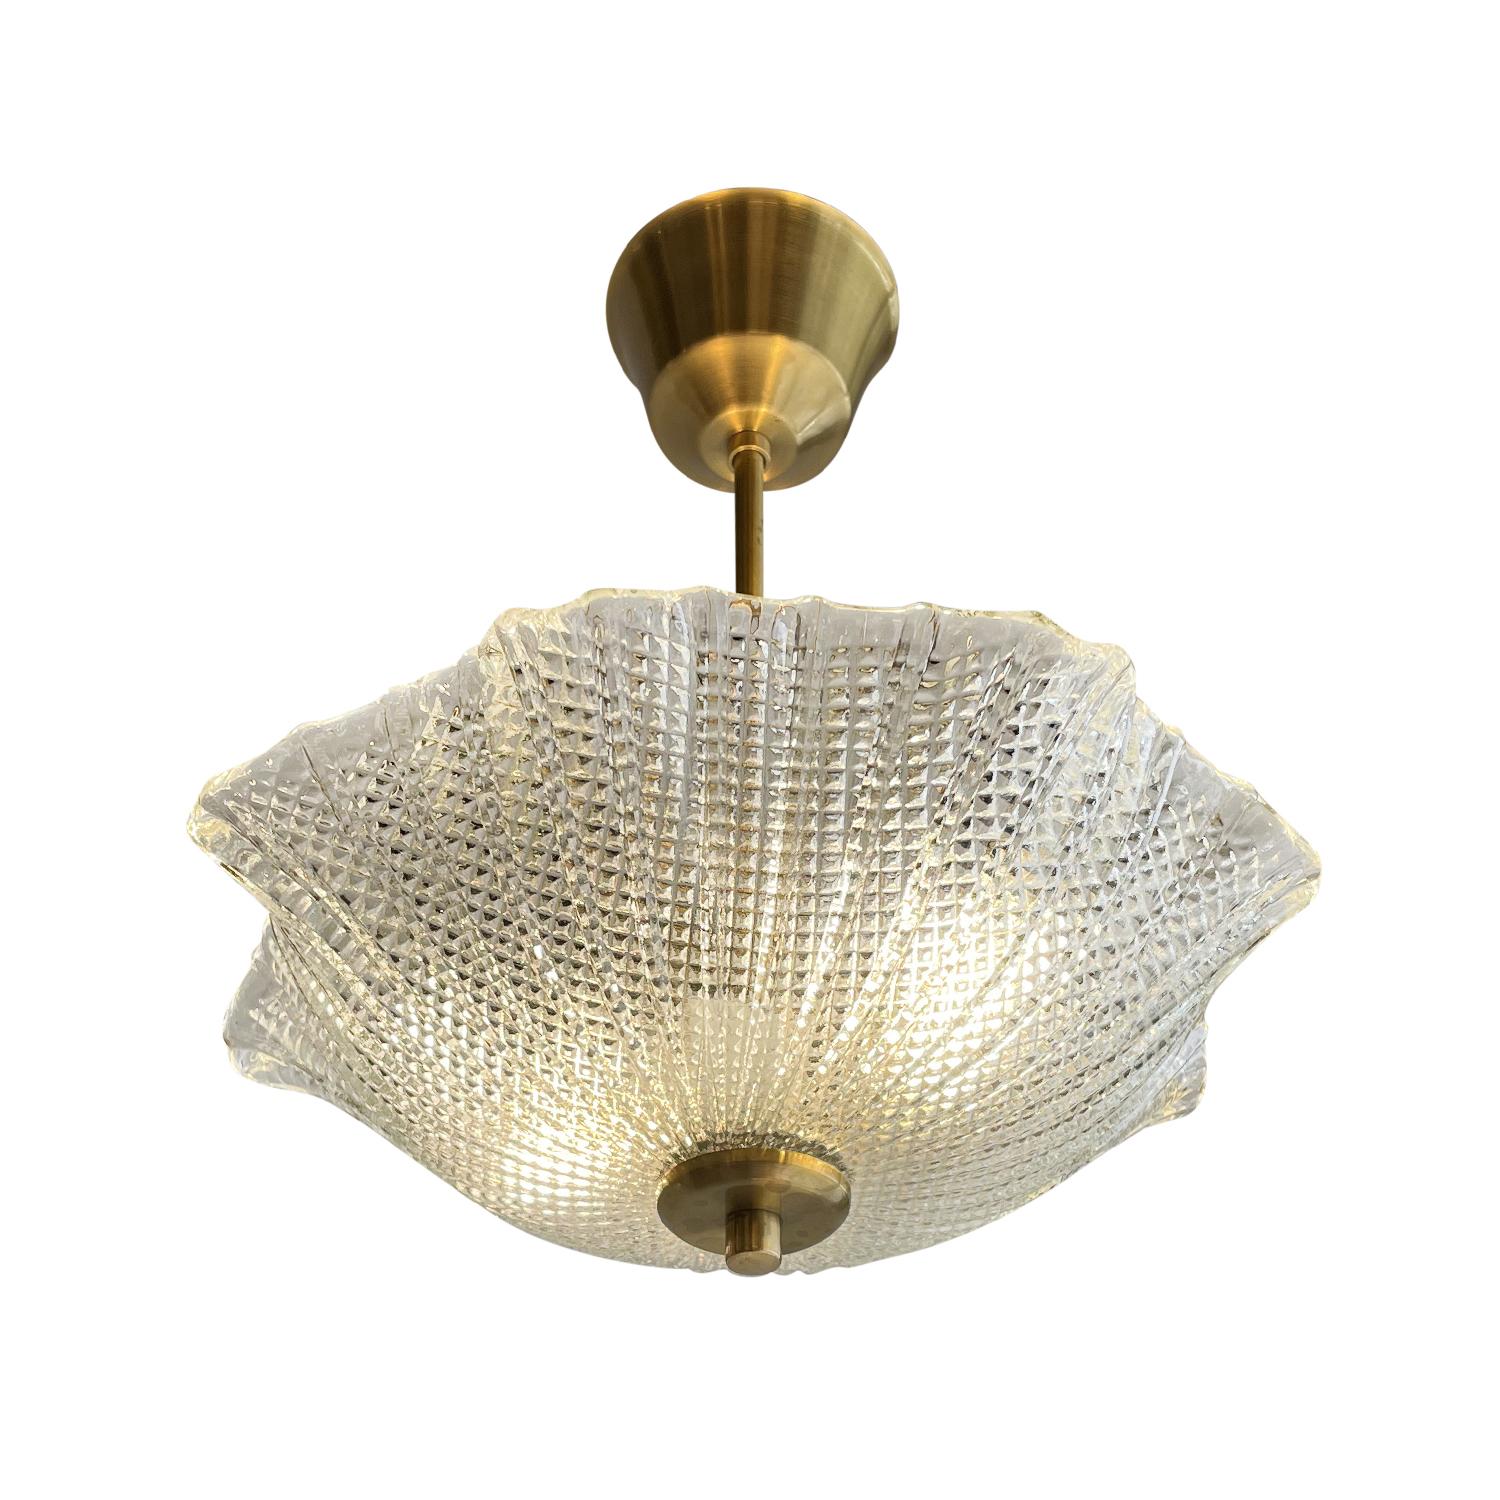 20th Century Swedish Smoked Glass Ceiling Light, Lamp Attributed to Orrefors For Sale 1